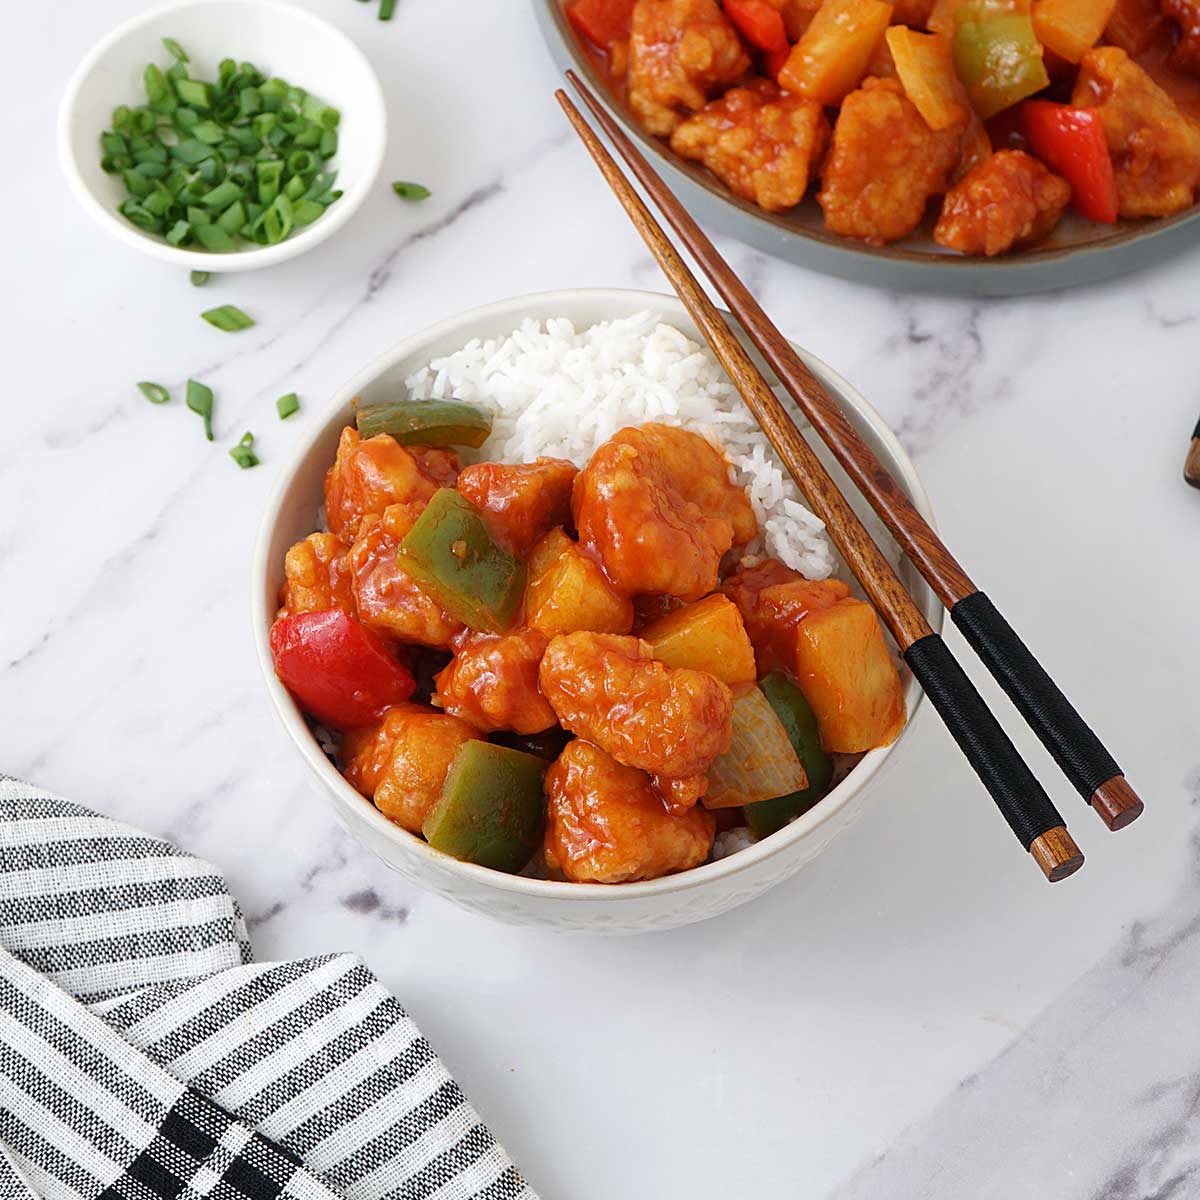 crispy chicken in sweet and sour sauce